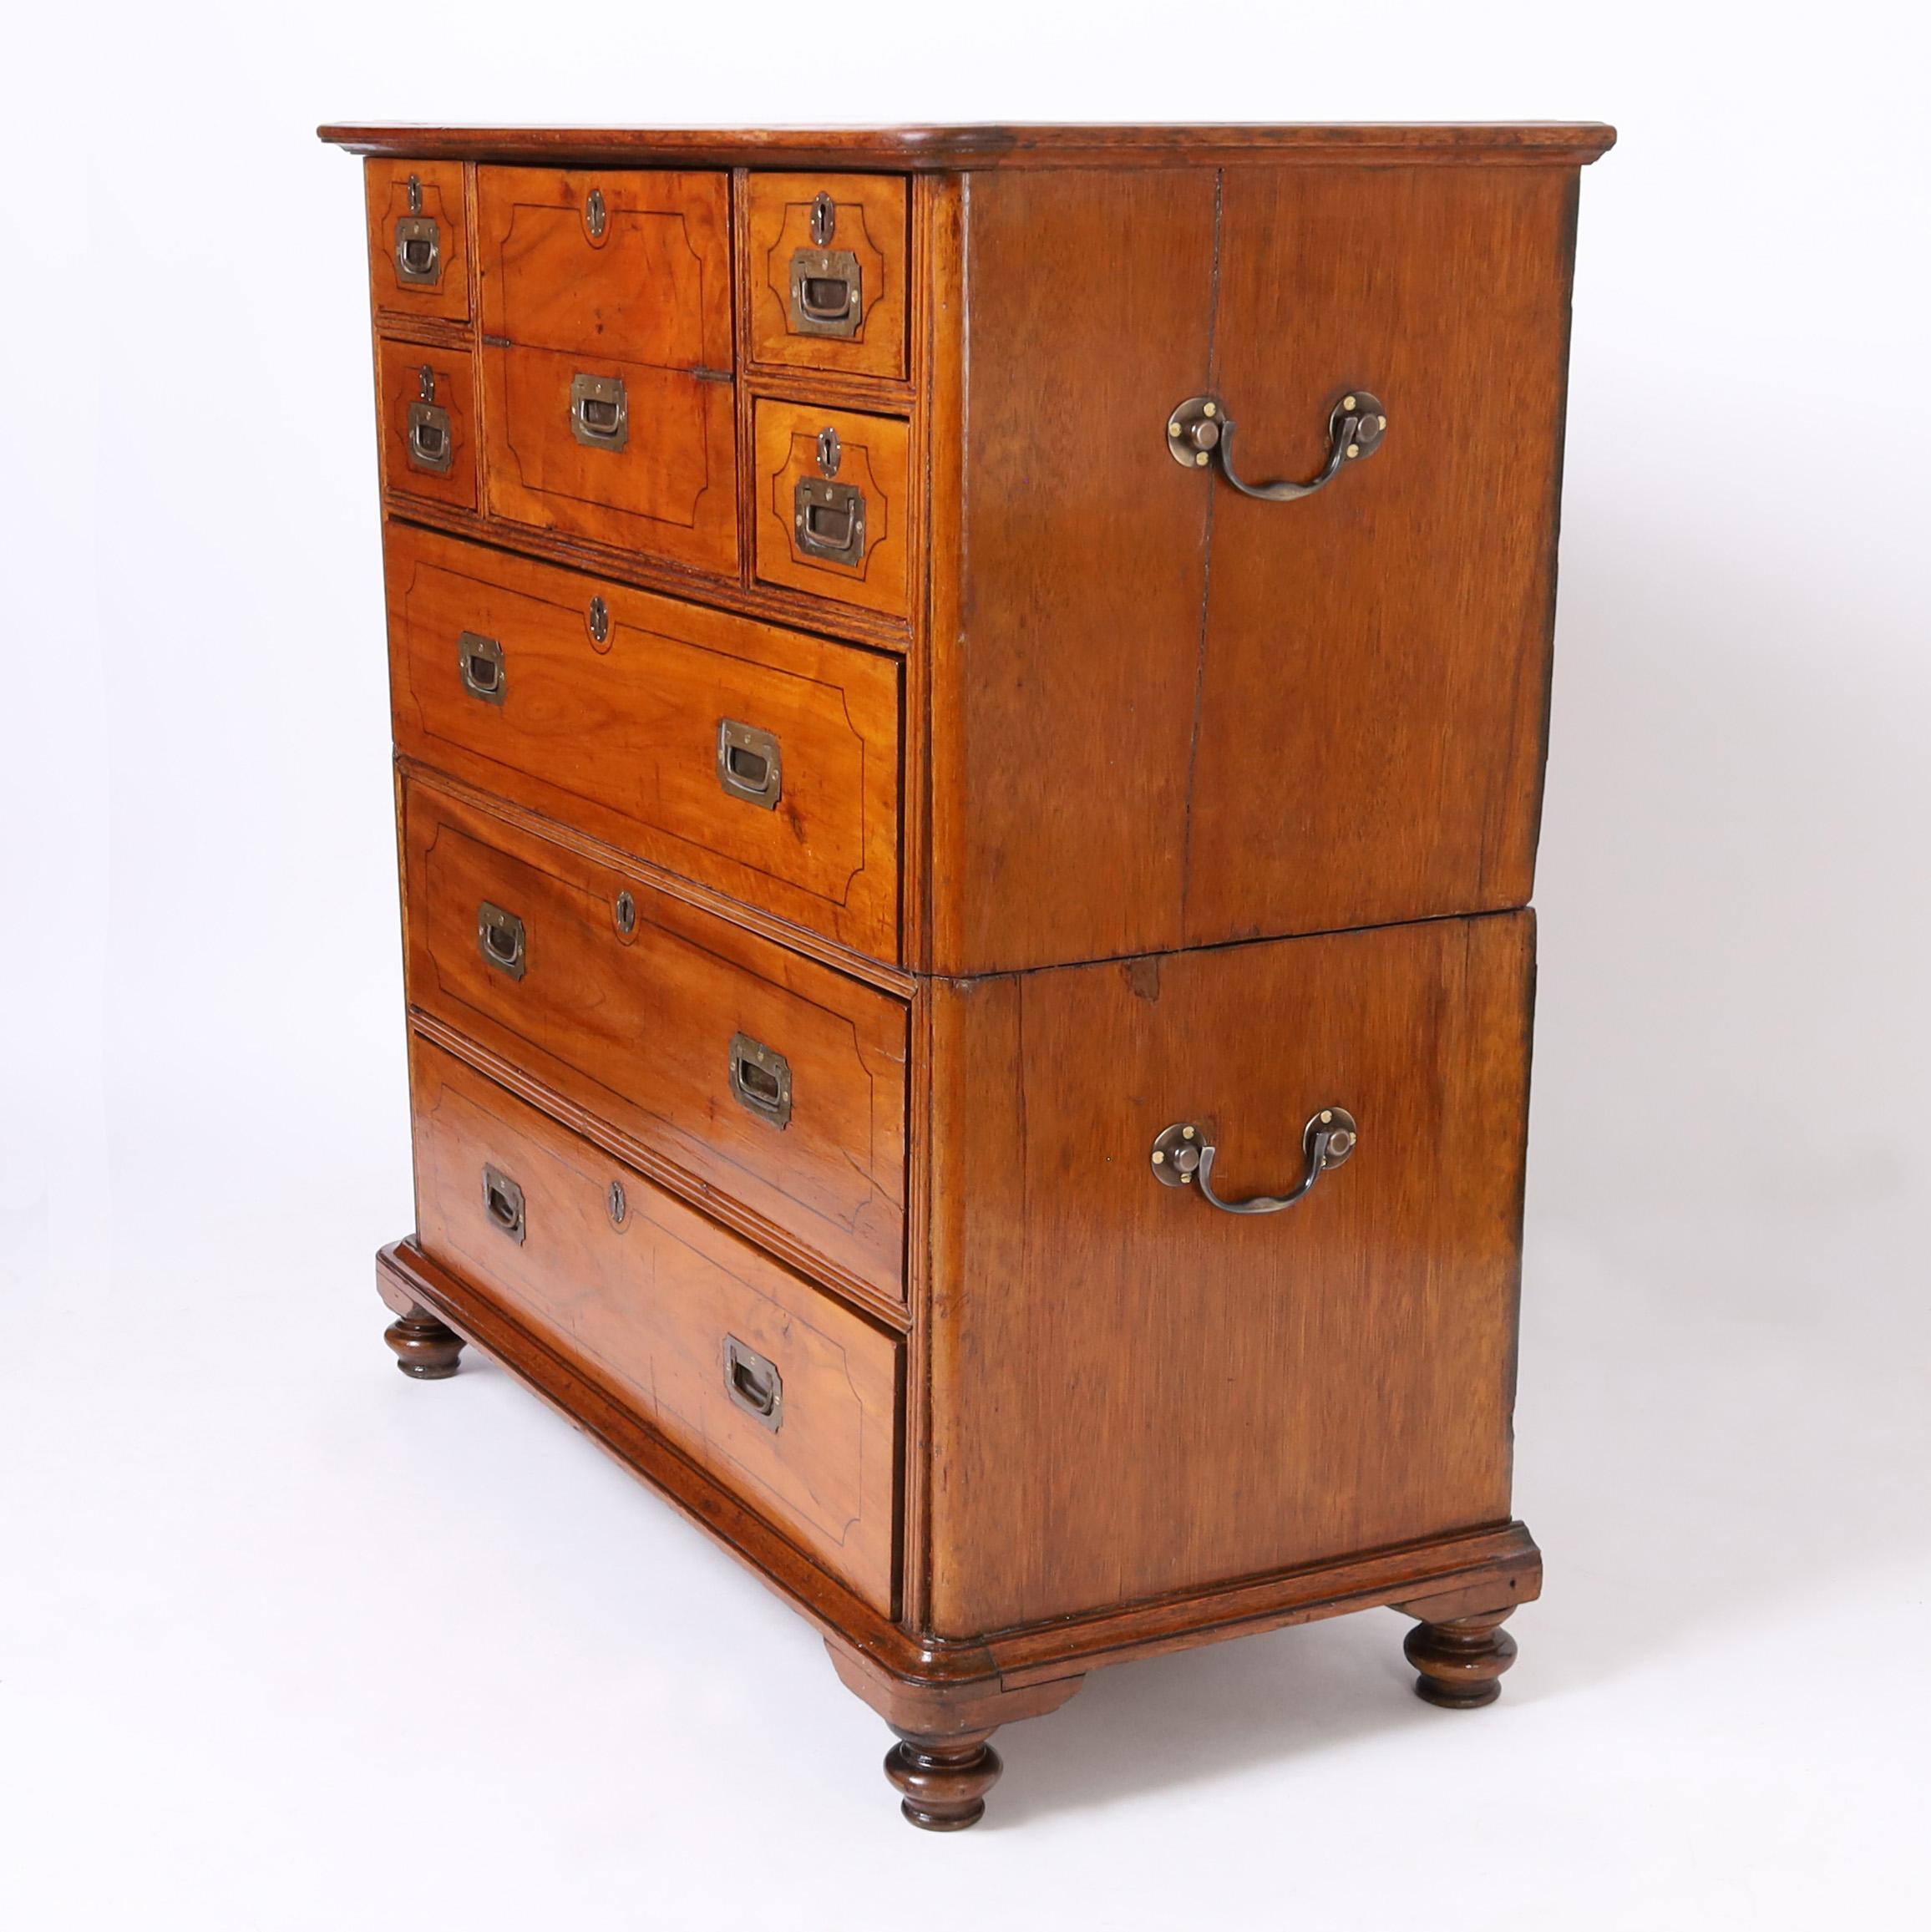 Turned Antique Anglo Chinese Campaign Chest of Drawers with Desk